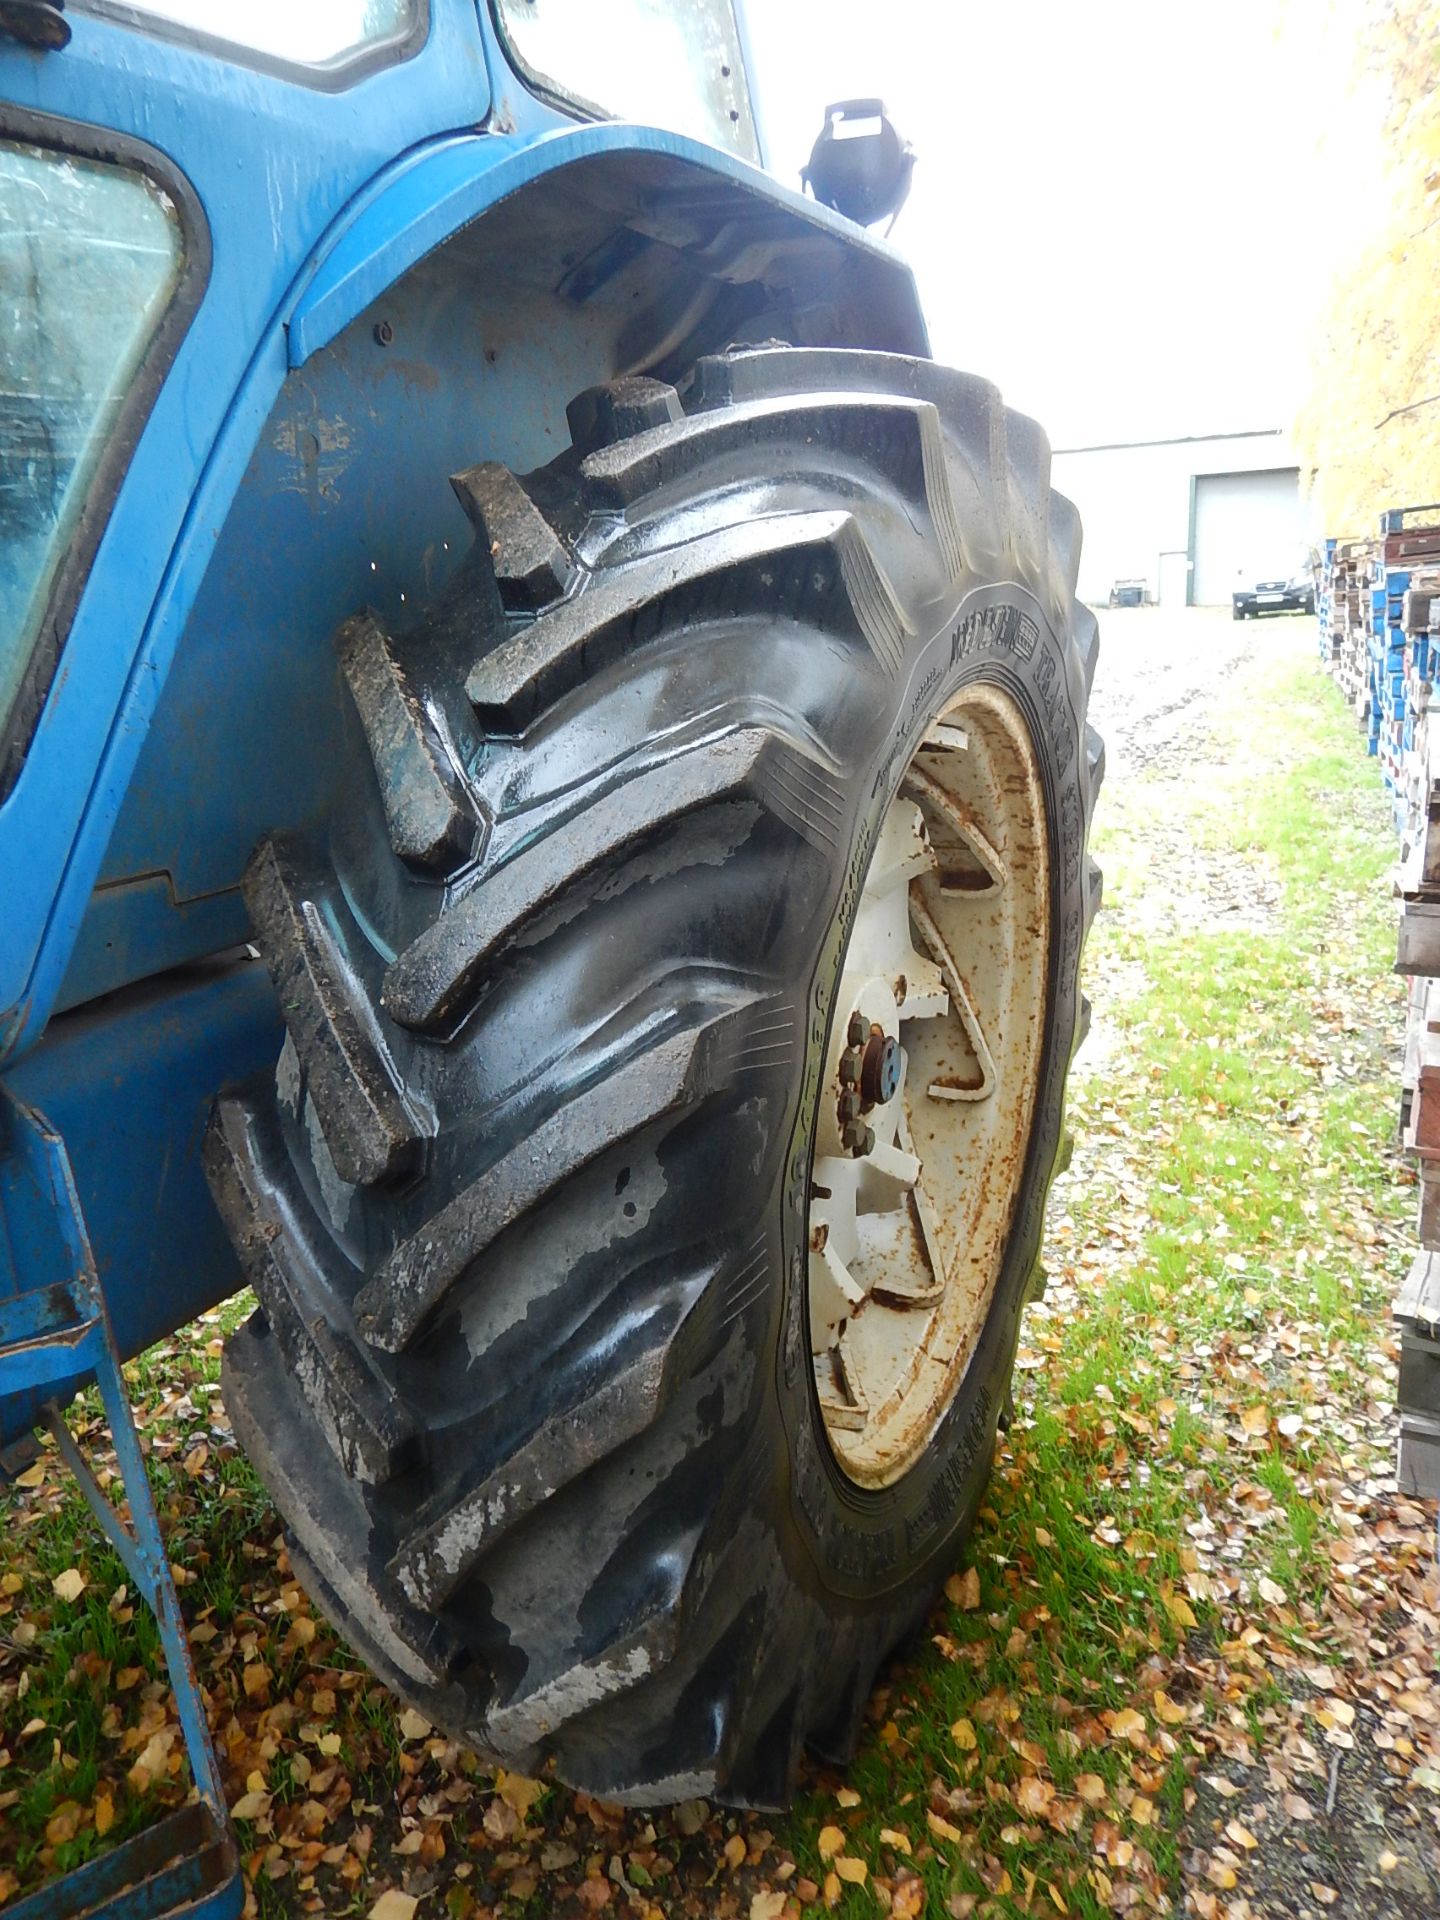 1985 FORD TW-25 4wd TRACTOR Fitted with front underslung weight, rear inside wheel weights, Q cab - Image 10 of 12